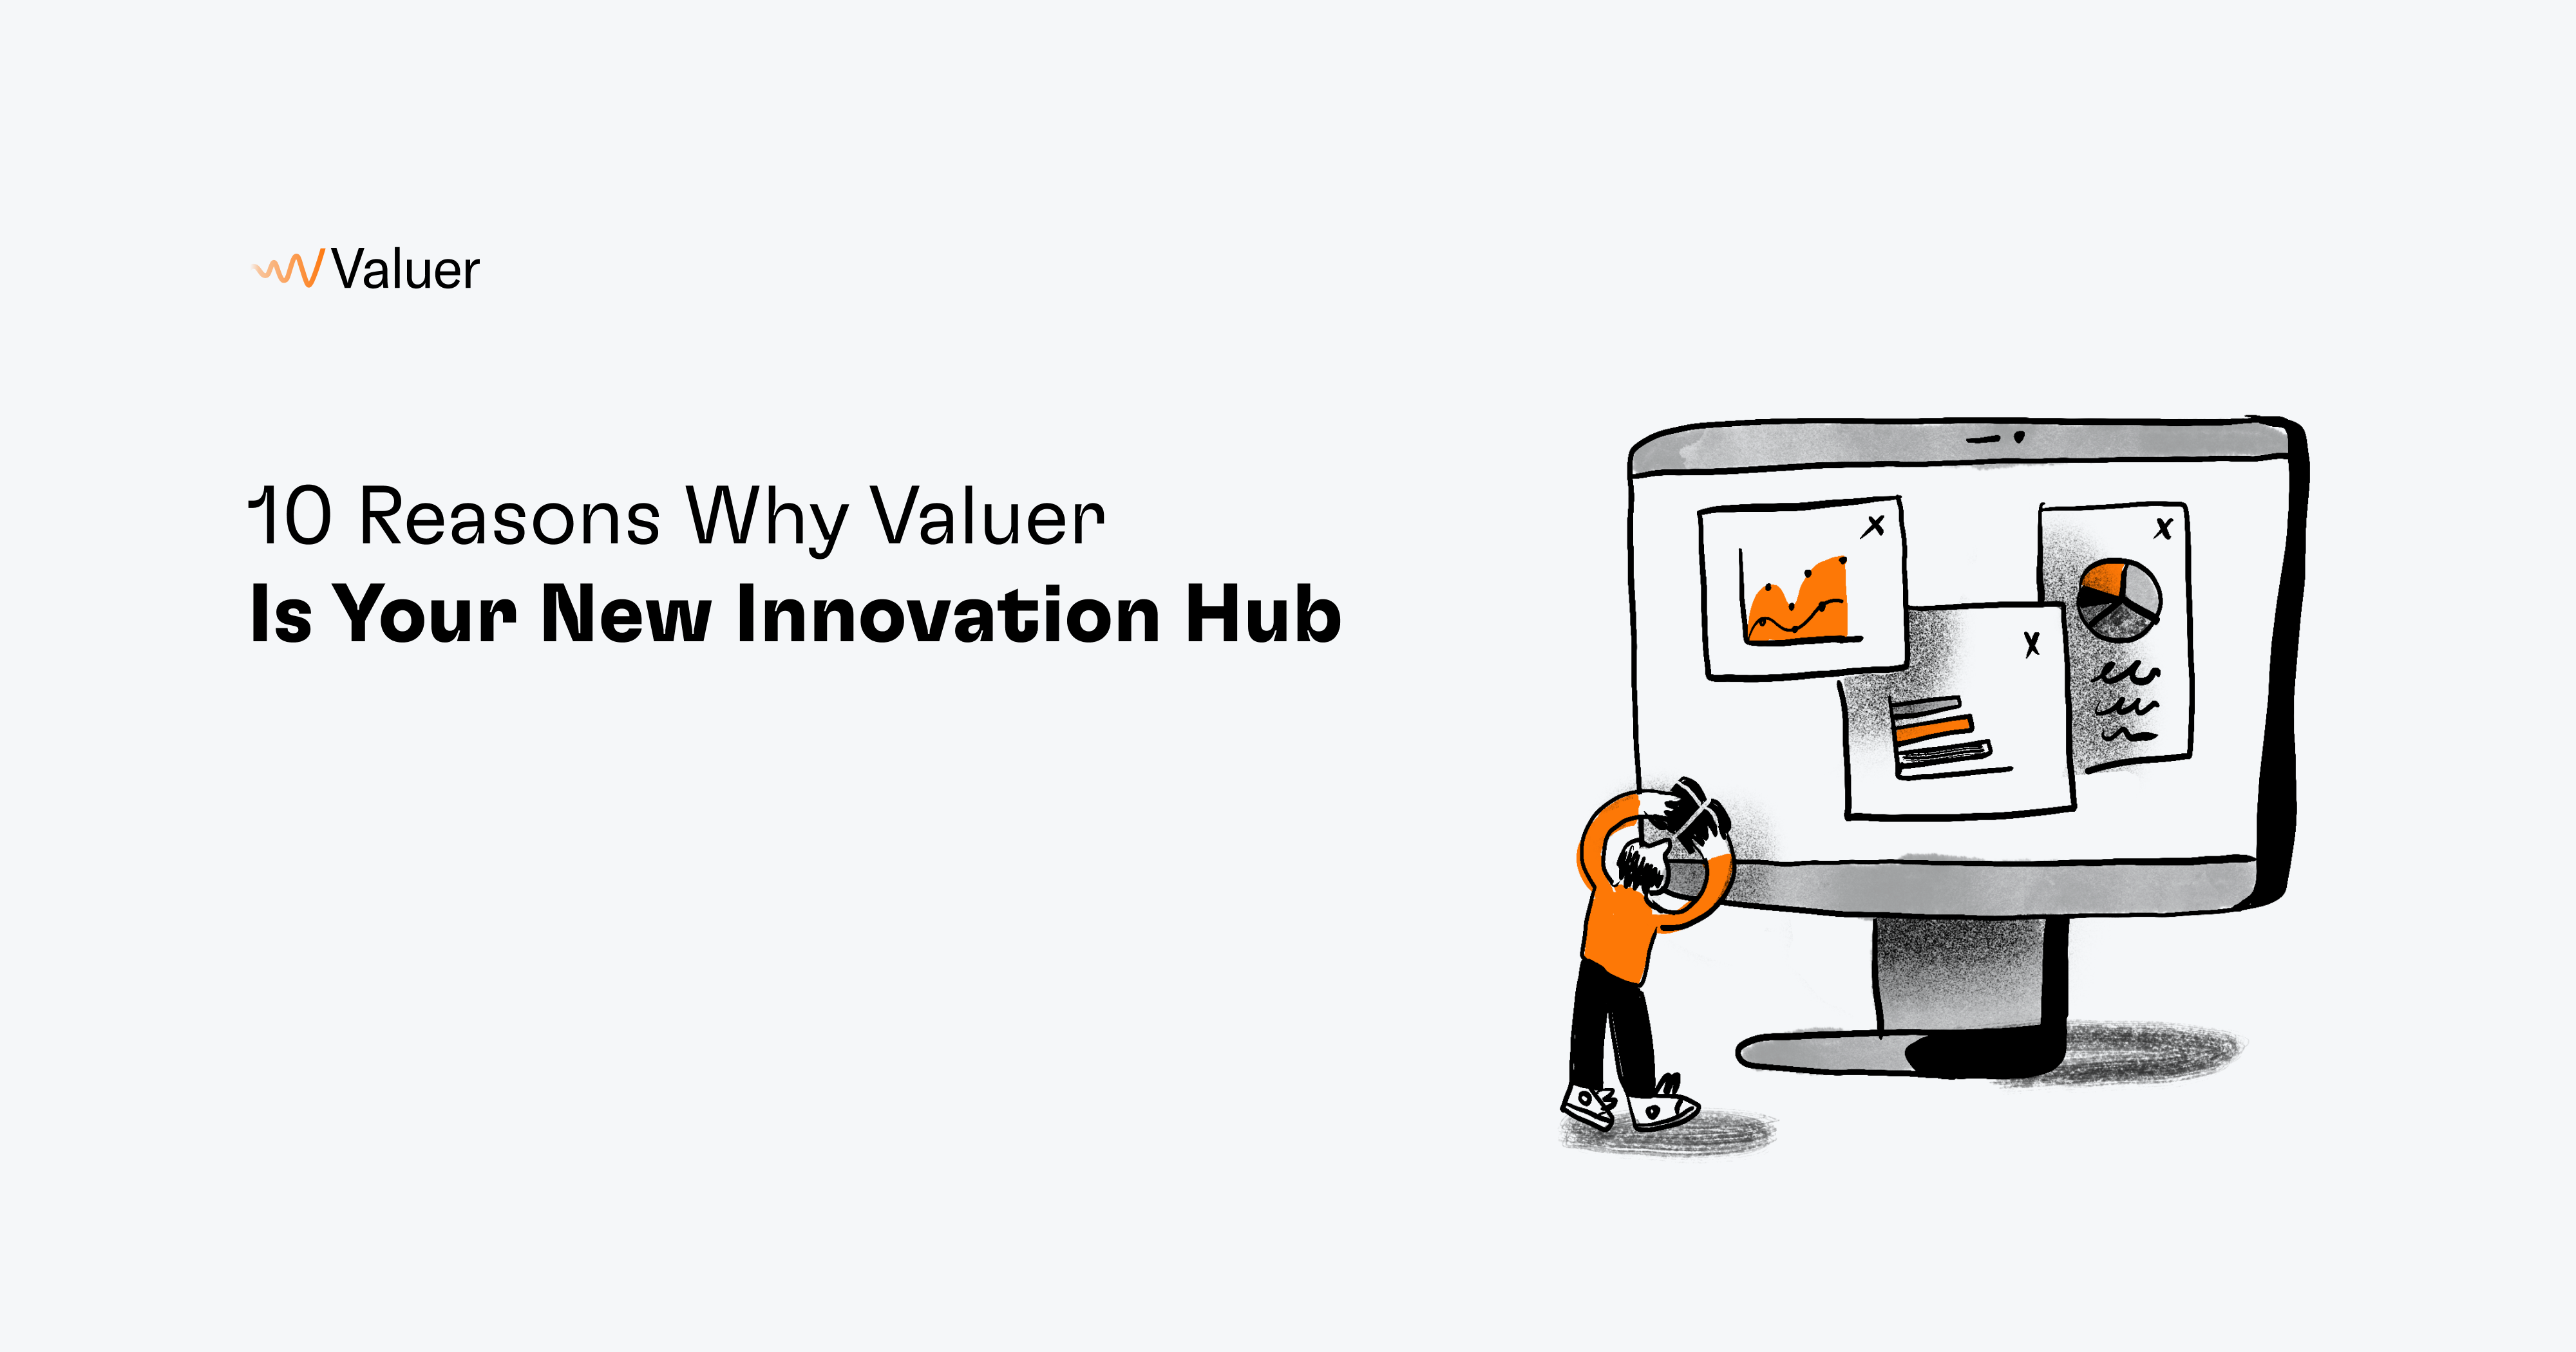 10 Reasons Why Valuer Should Be Your Next Innovation Tool